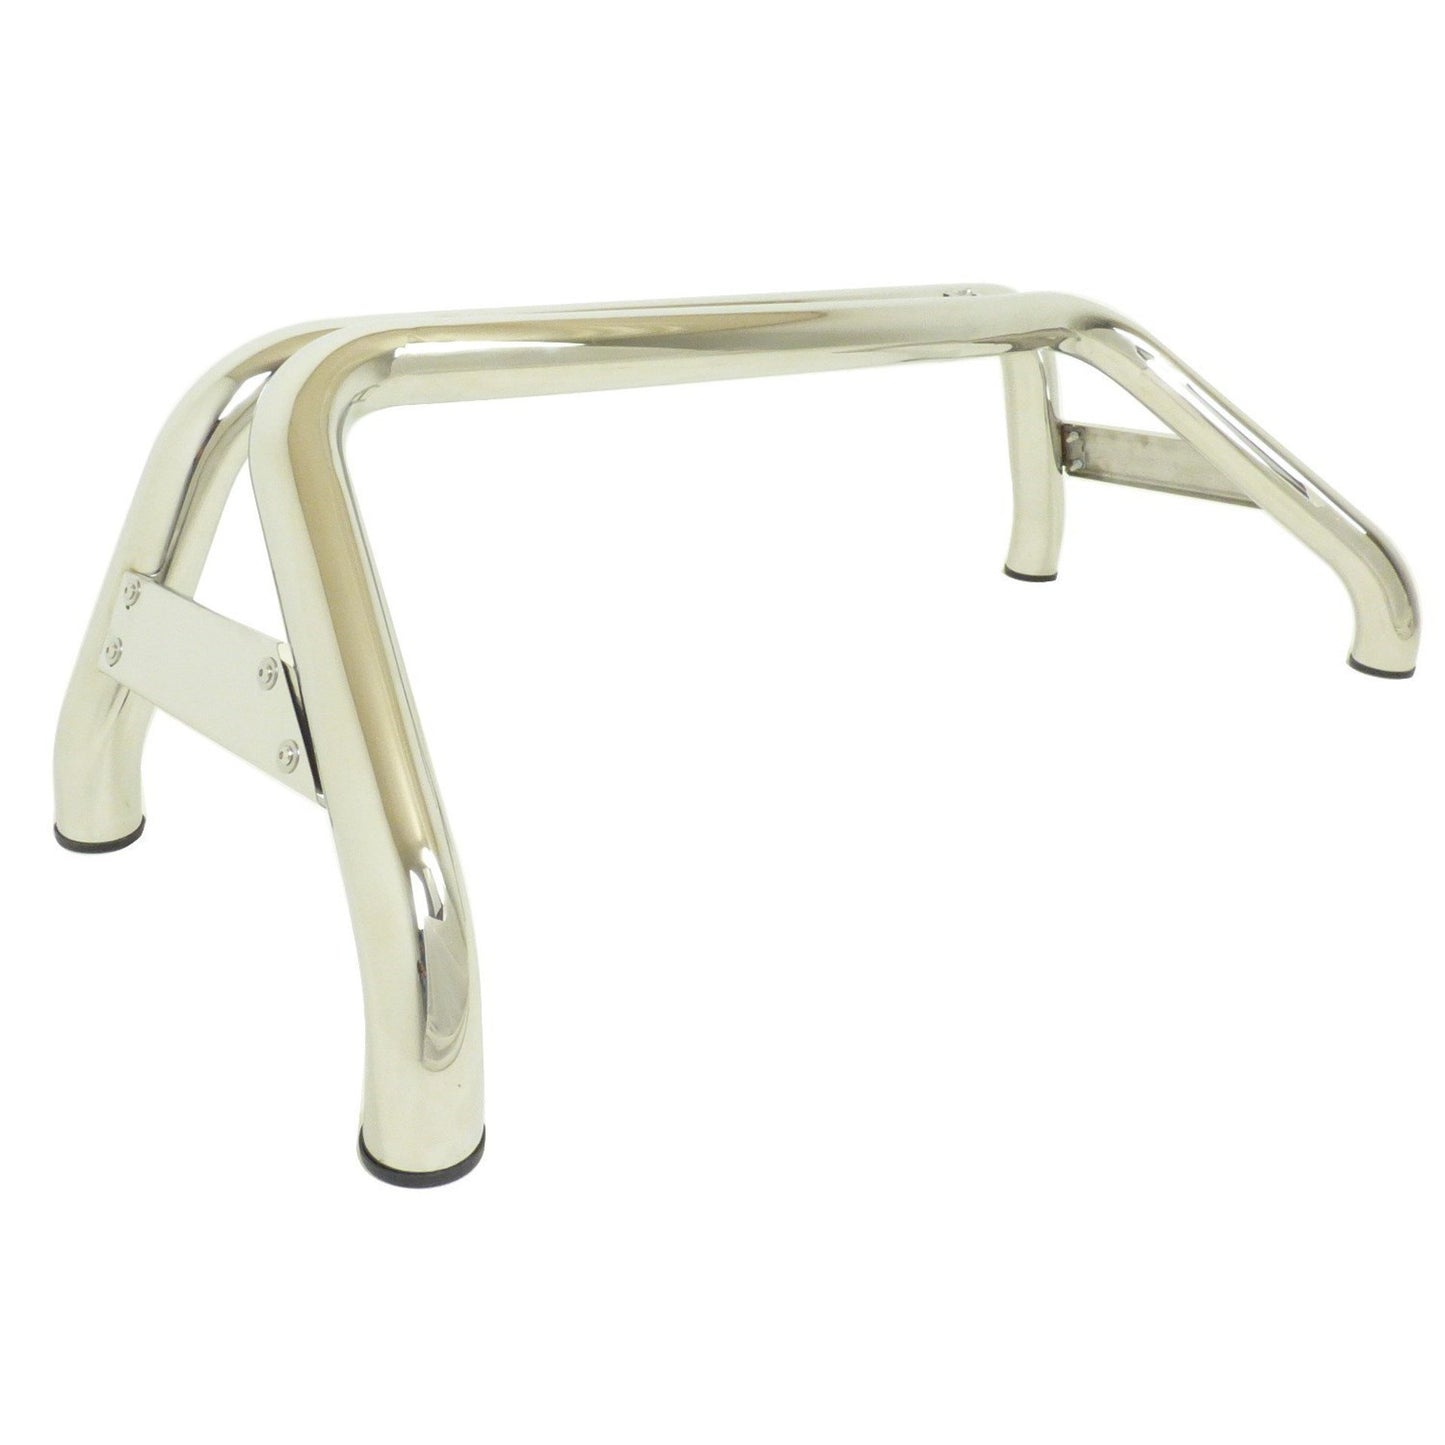 Stainless Steel Single Loop Roll Sports Bar for Ford Ranger 2012+ MK3 T6 (P375) -  - sold by Direct4x4